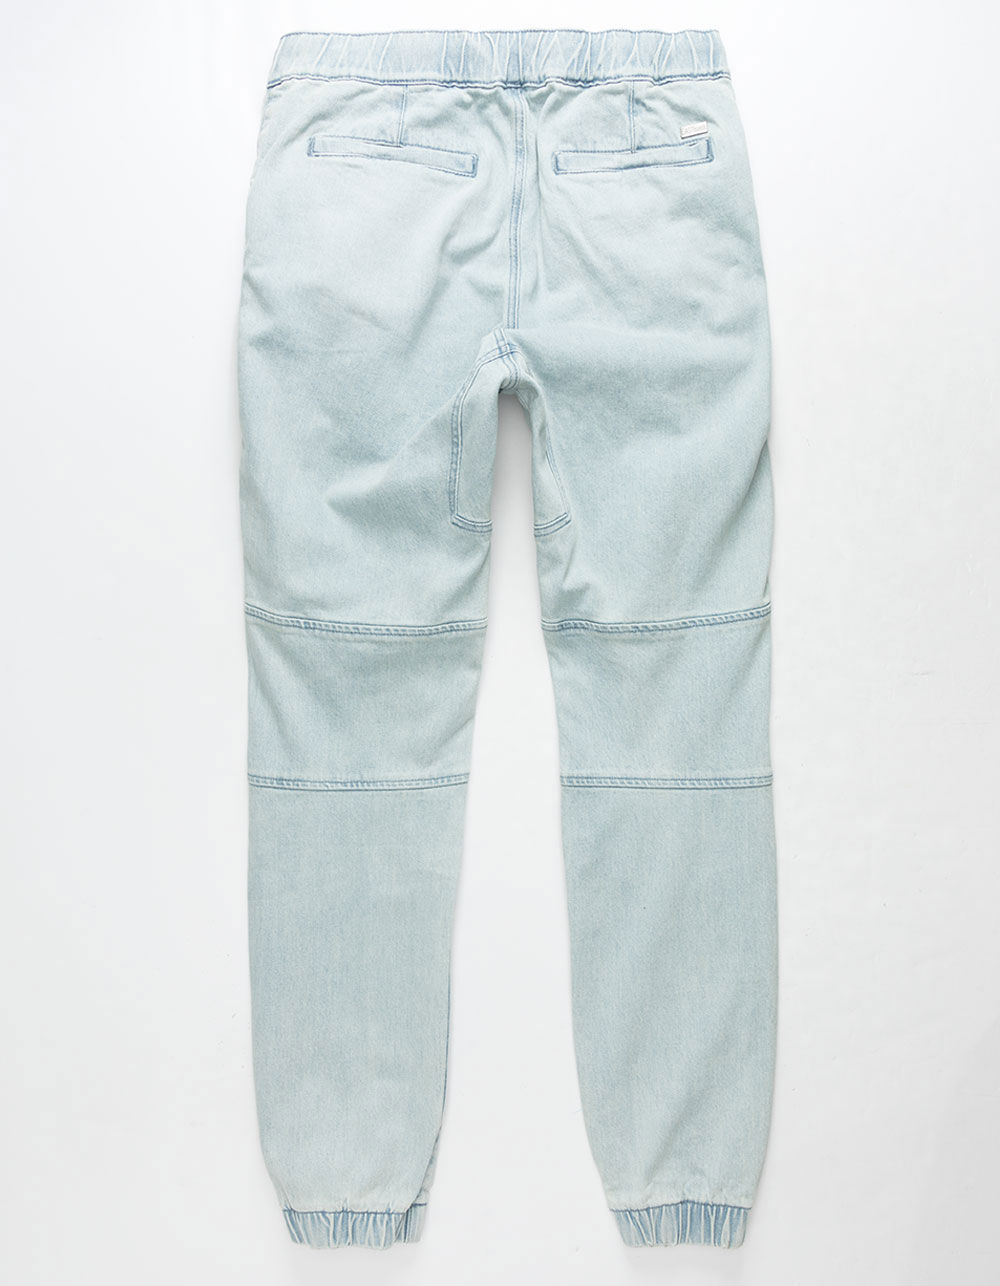 EAST POINTE Ripped Denim Mens Moto Jogger Pants image number 4